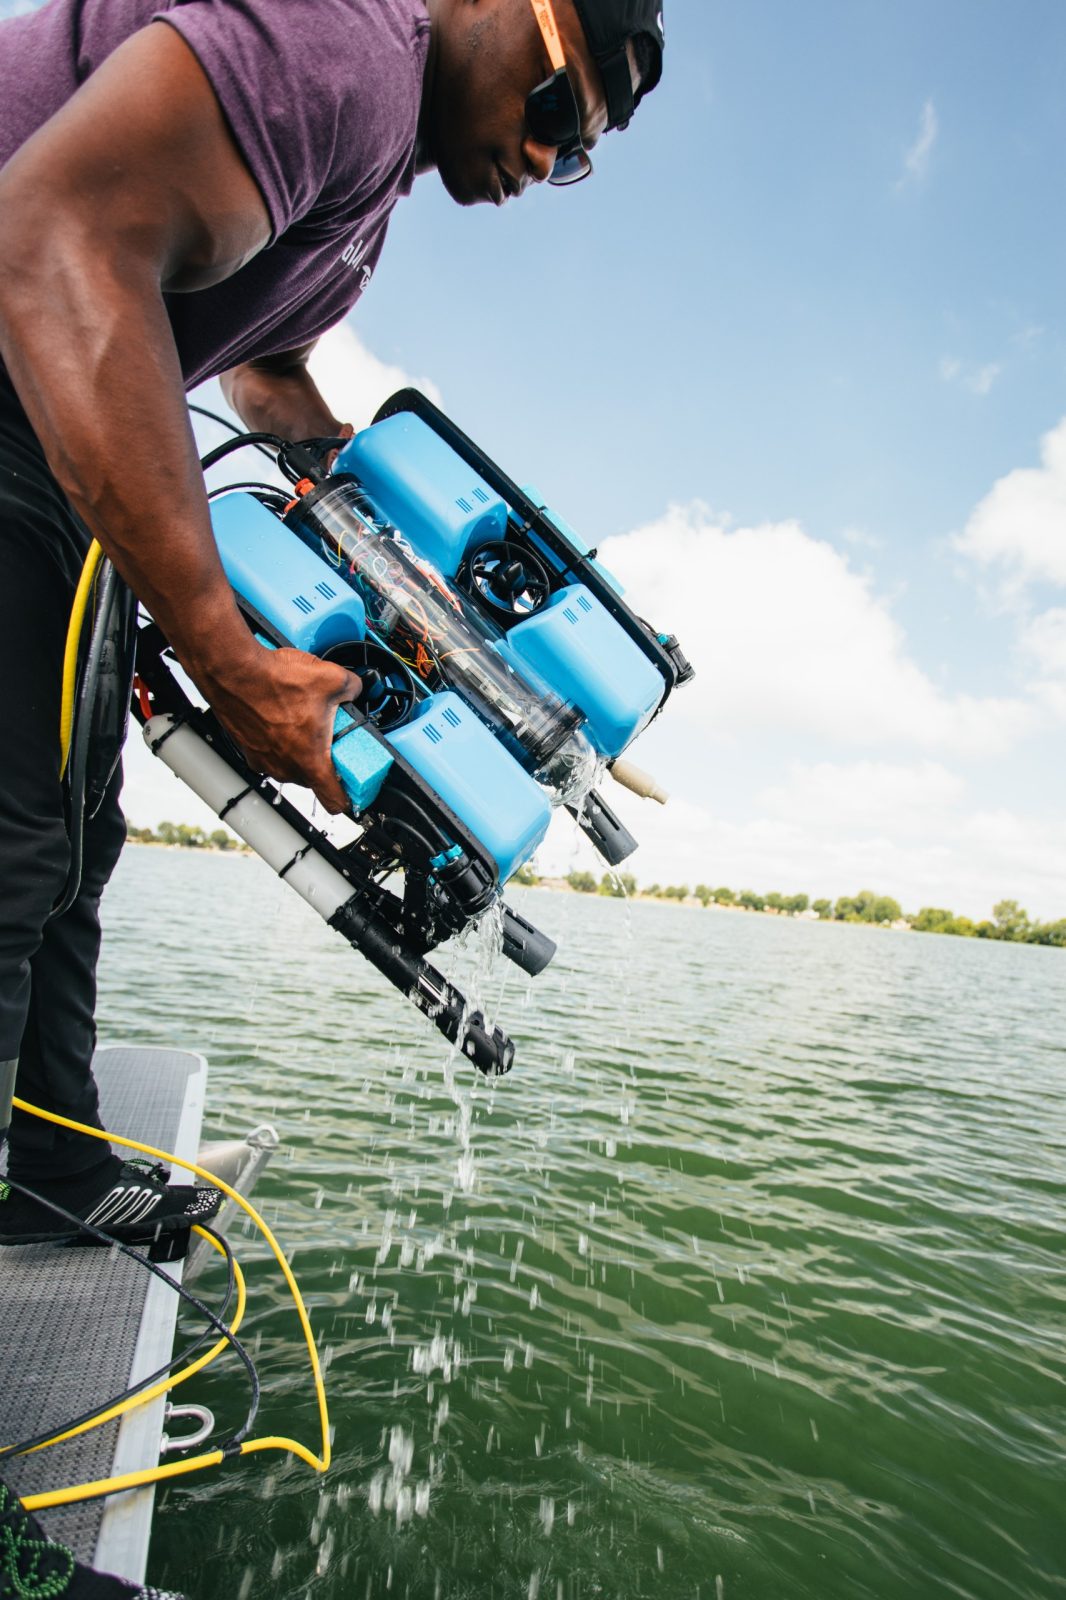 Undergraduate student Bryan Bloomfield from Morehouse College is seen recovering a heavy, light blue ROV from Grand Lake St Marys, Ohio. The lake is extremely green. Courtesy of Christina+David. 